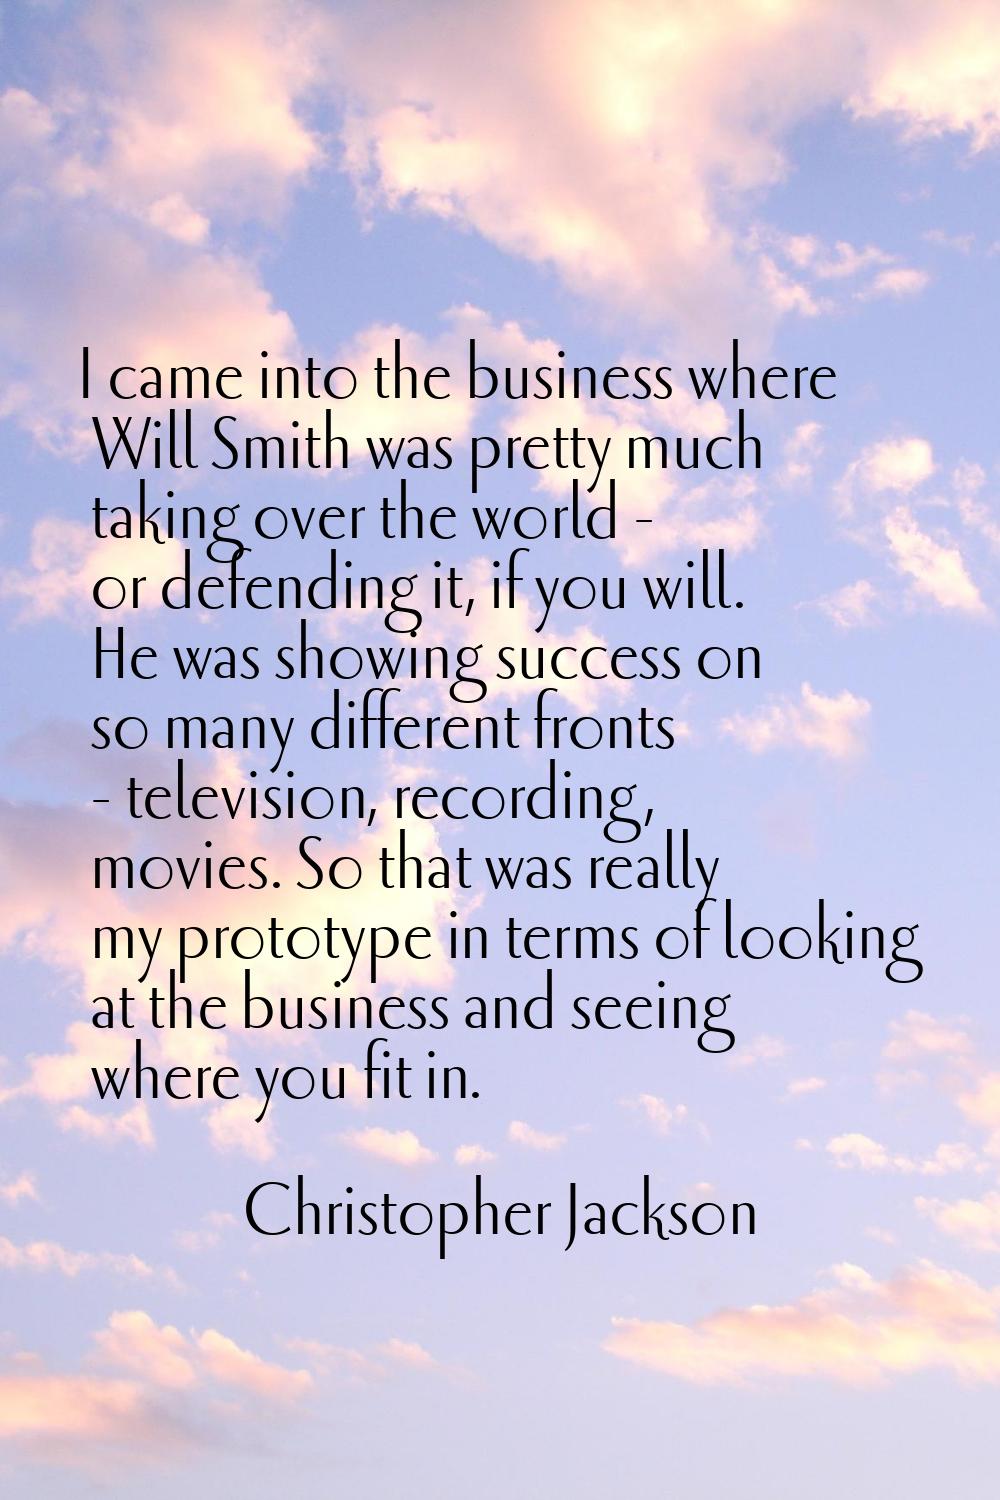 I came into the business where Will Smith was pretty much taking over the world - or defending it, 